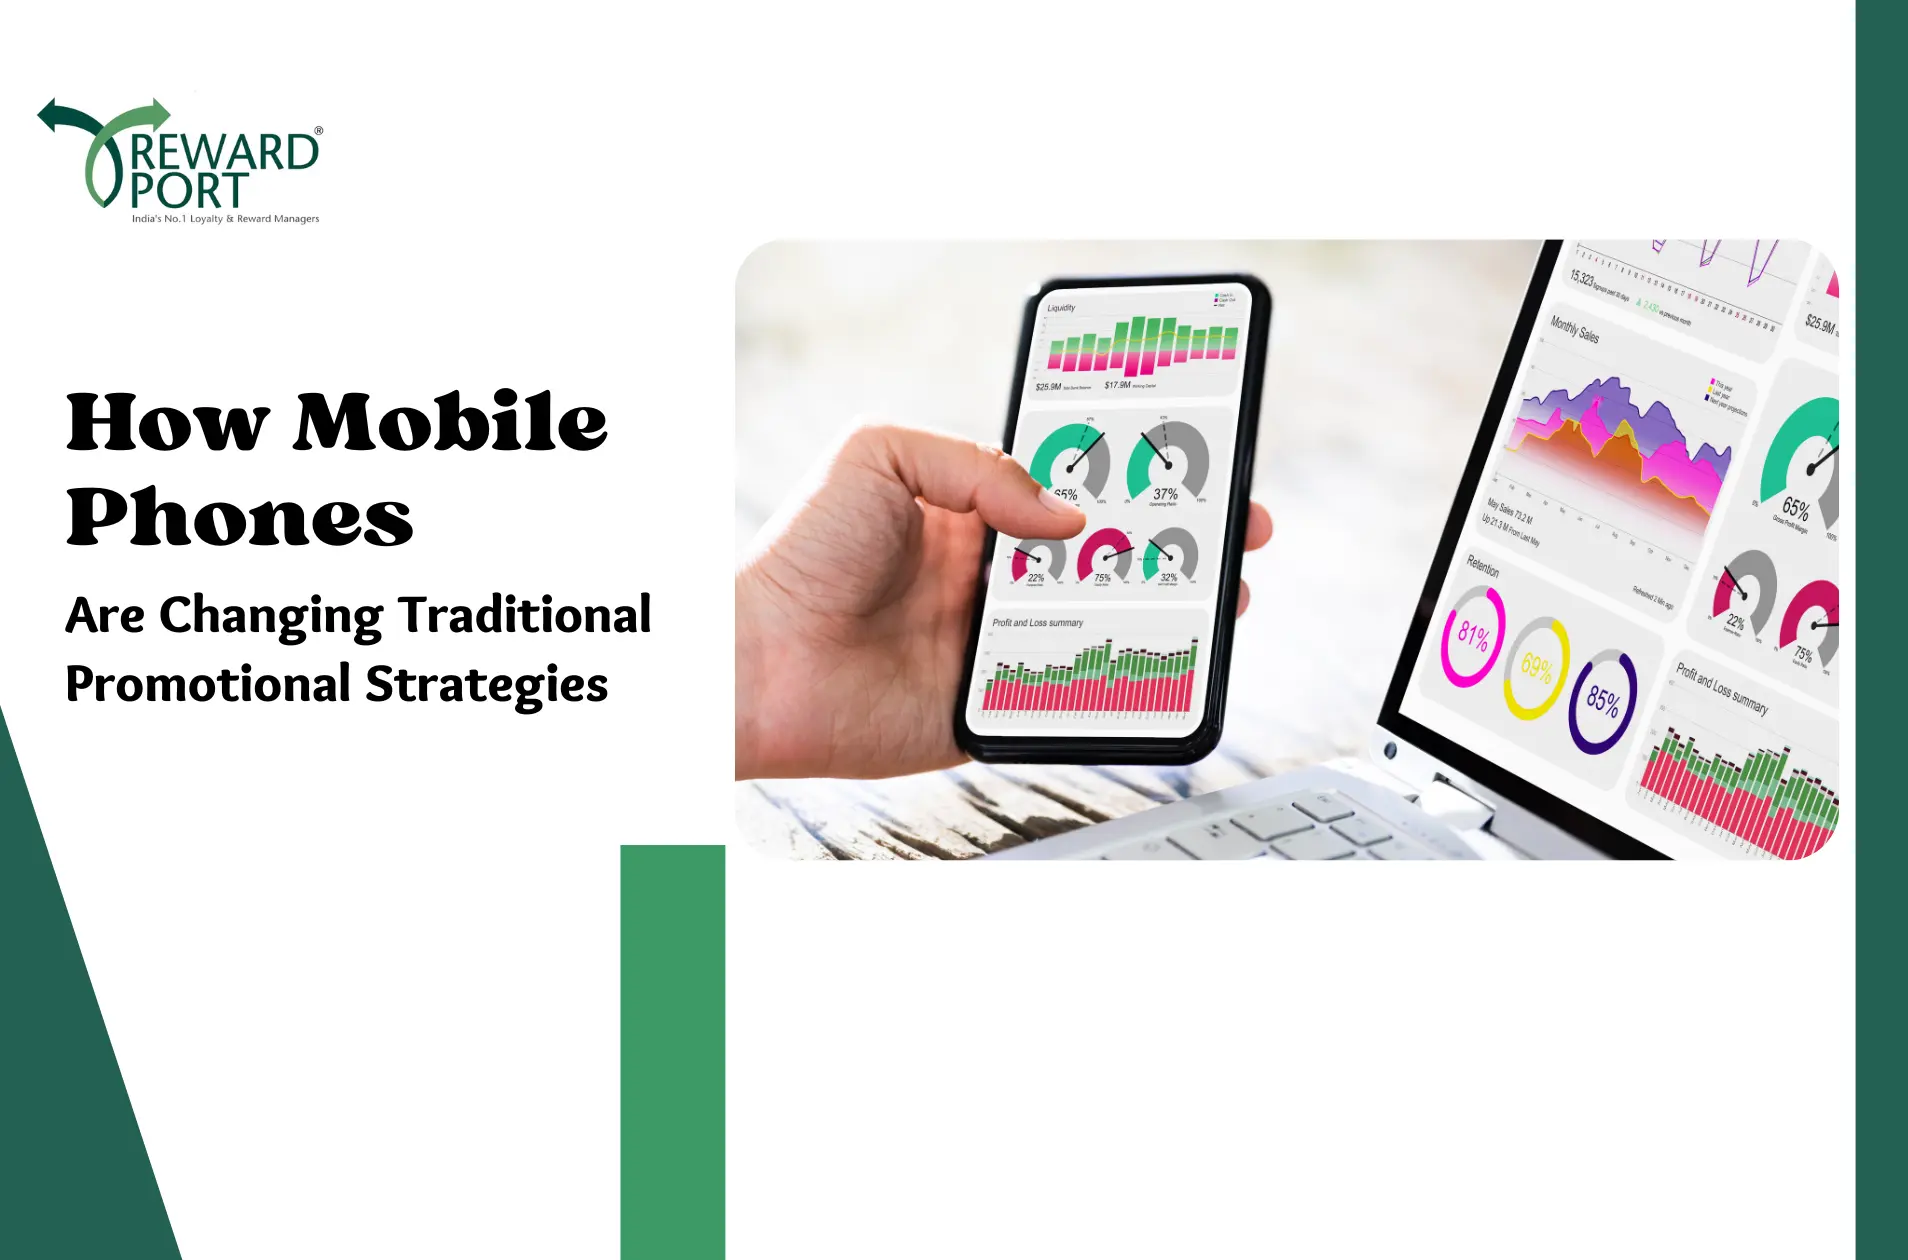 How Mobile Phones Are Changing Traditional Promotional Strategies